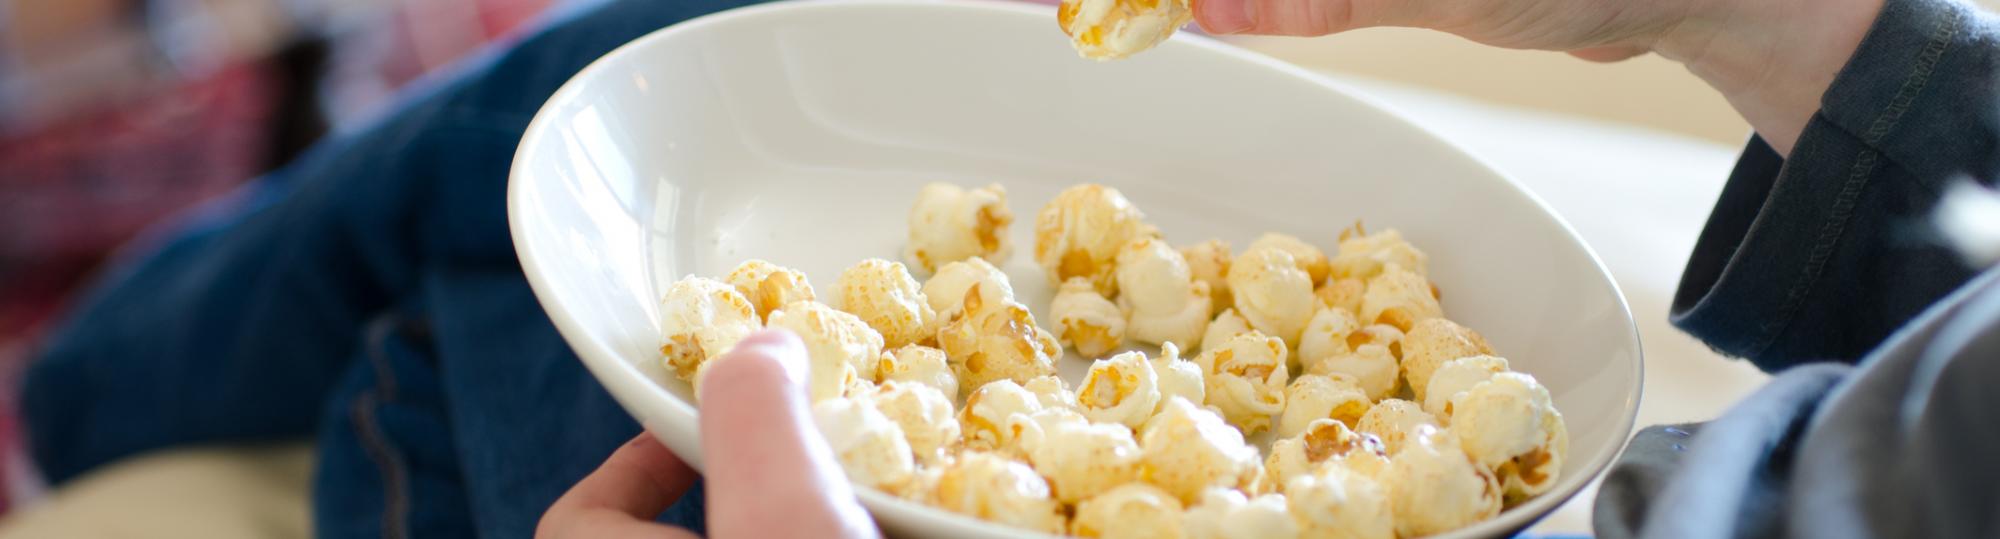 The Popcorn Factory Military Discount with Veterans Advantage